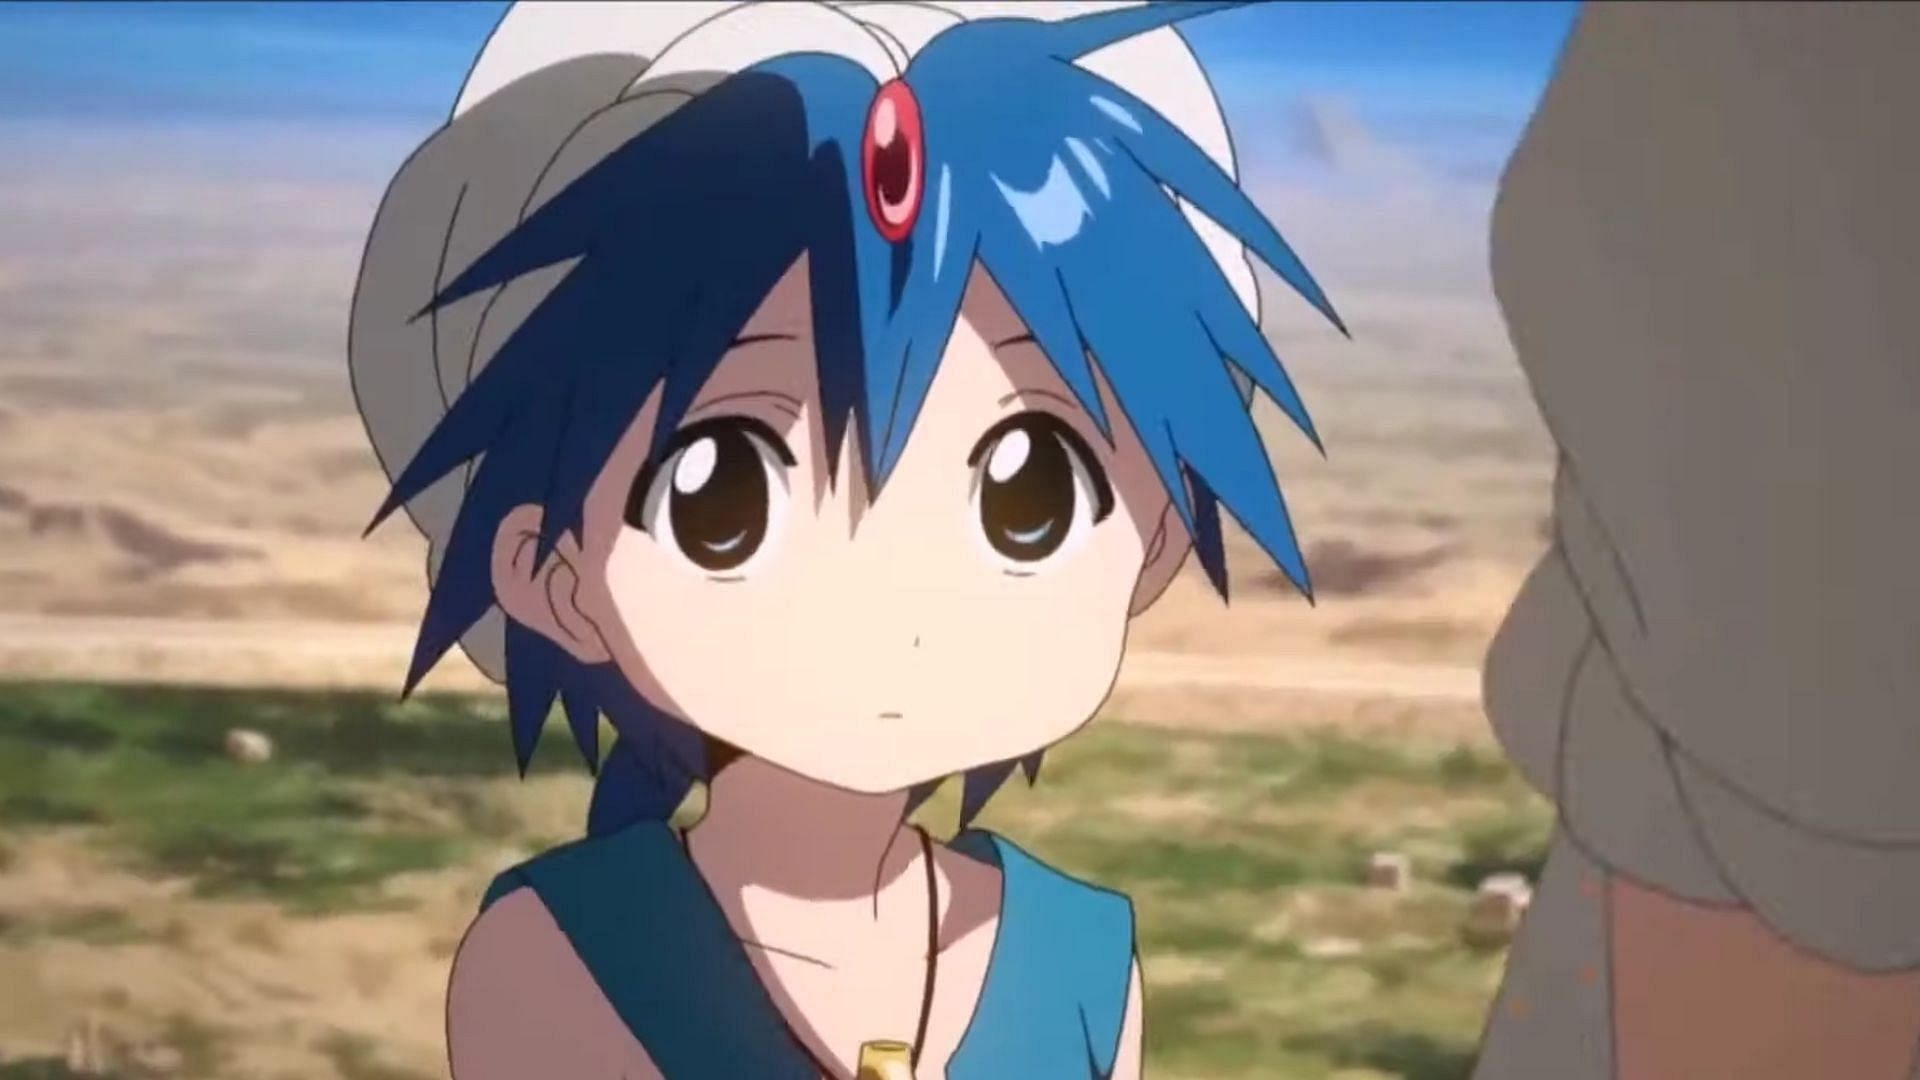 Aladdin the young boy with magical powers in Magi:The Labyrinth of Magic (Image via A1 Pictures)